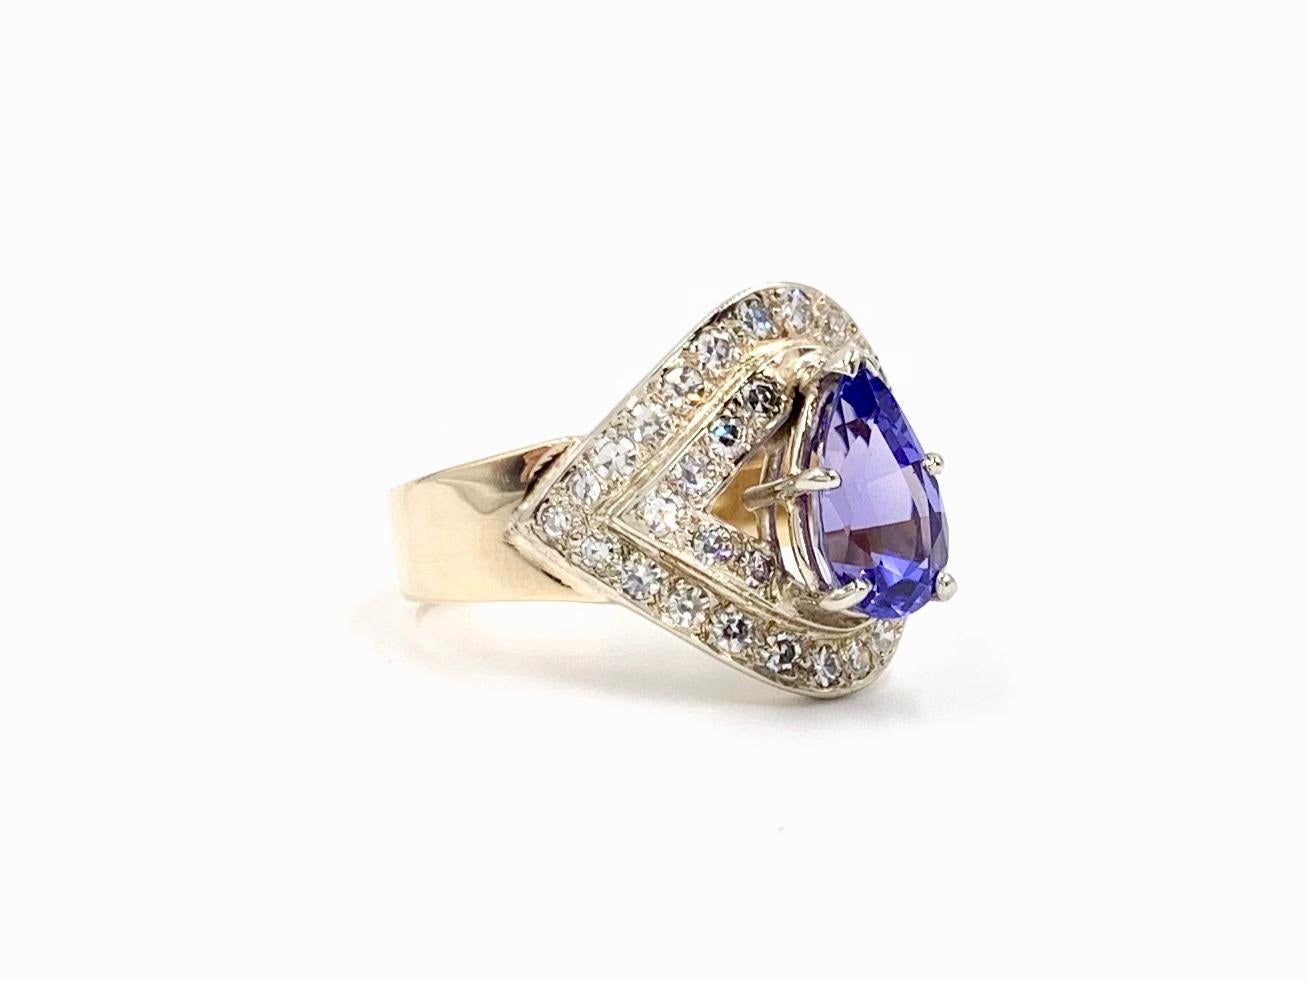 Circa 1960's, this Art Deco Style revival 14 karat two tone gold ring features a pear shape Tanzanite and single cut white diamonds. Diamonds are set in white gold with quality of approximately H color, SI1 clarity. Tanzanite is approximately 1.30